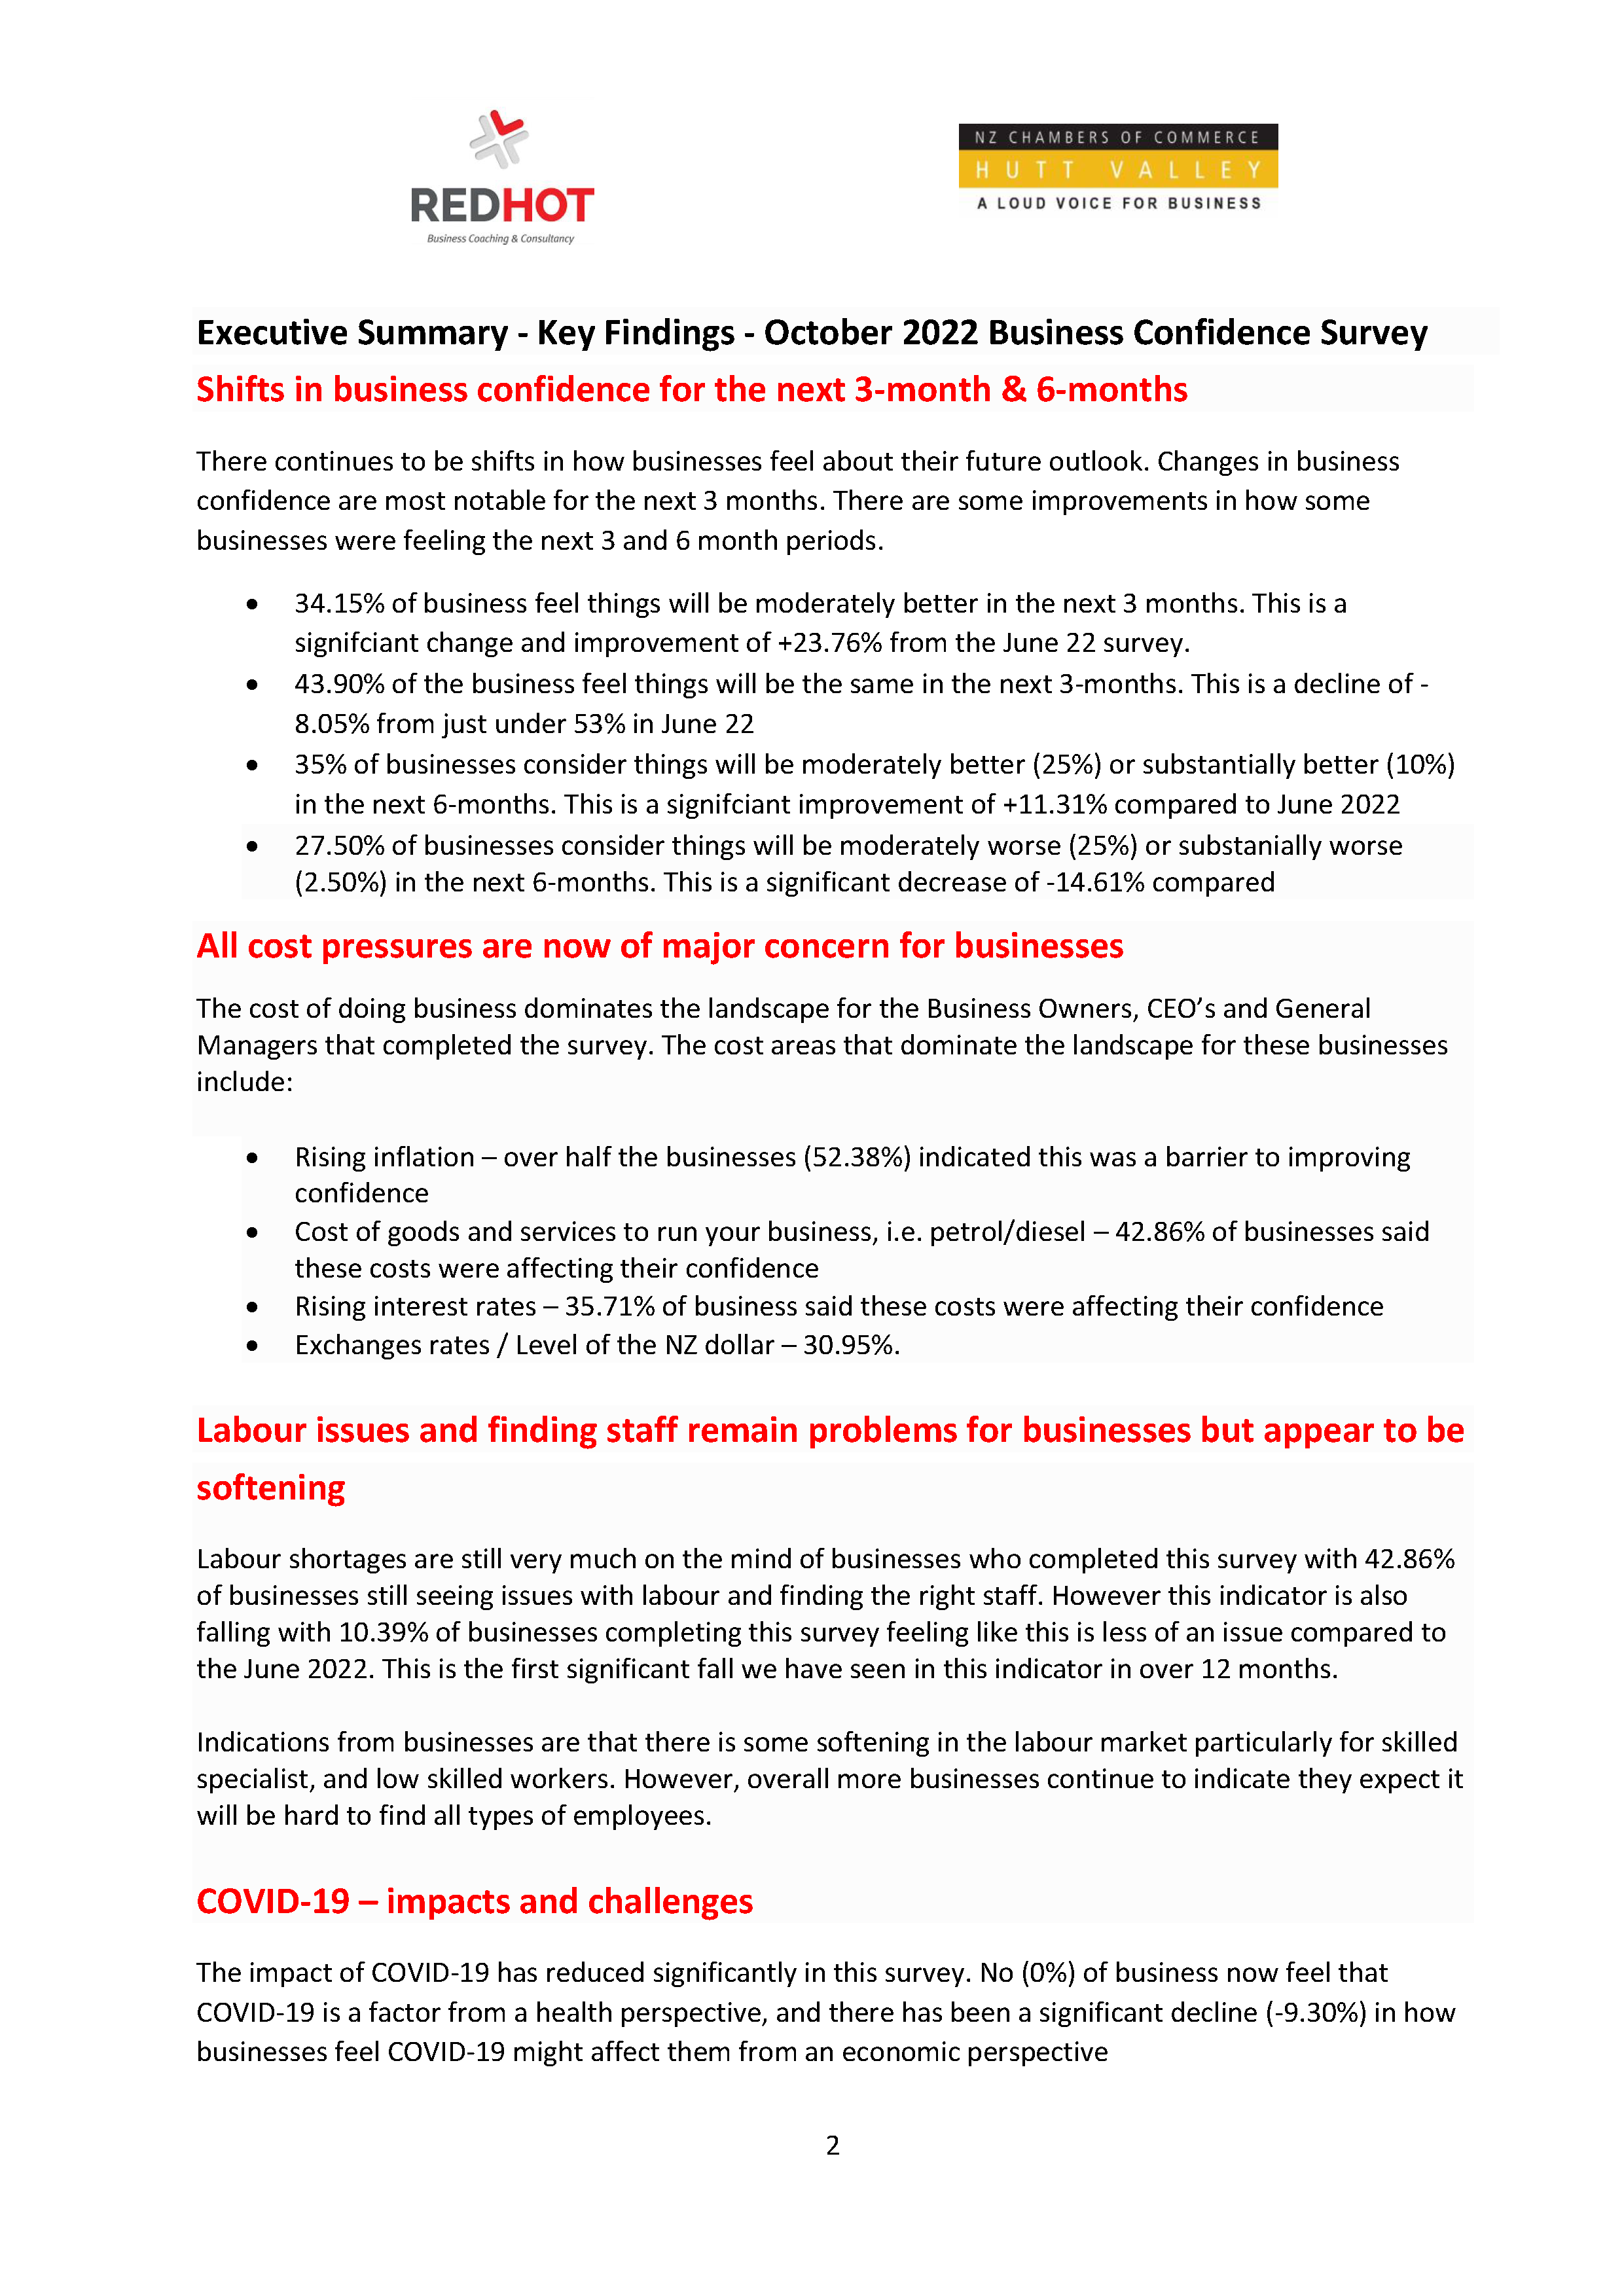 Hutt Valley Chamber of Commerce Business Confidence Survey - October 2022